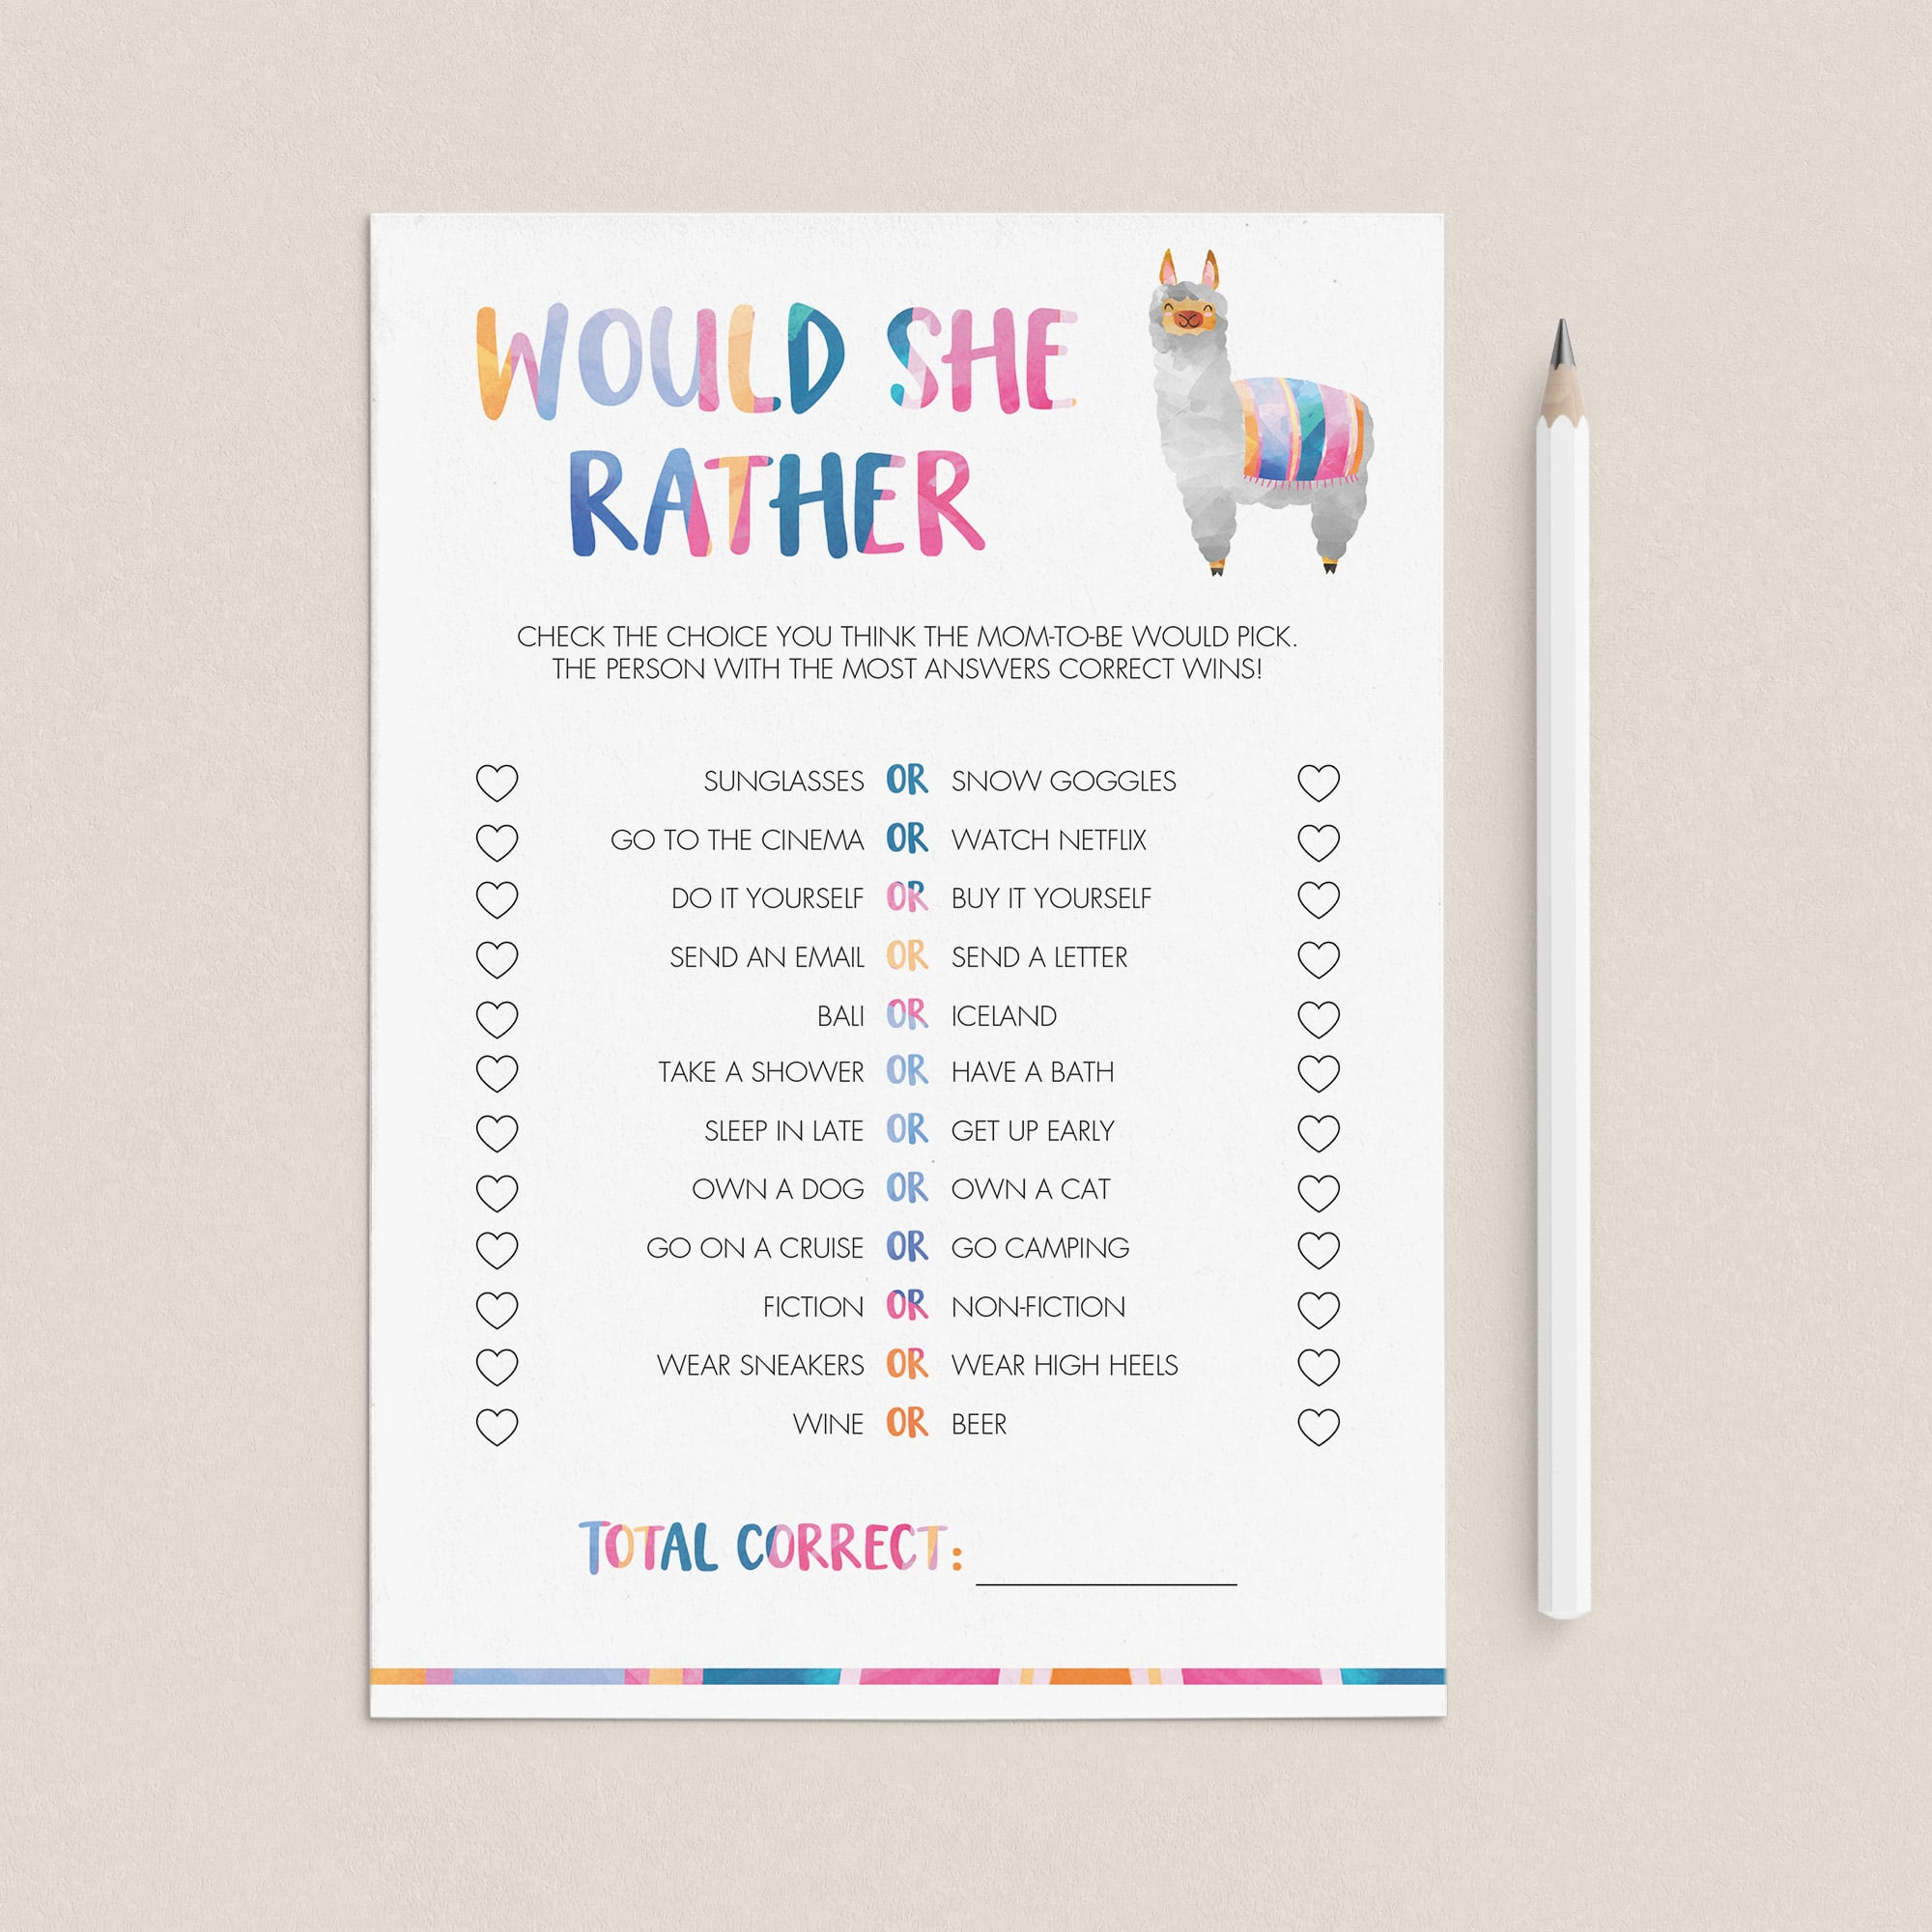 Llama baby shower games printable would she rather by LittleSizzle